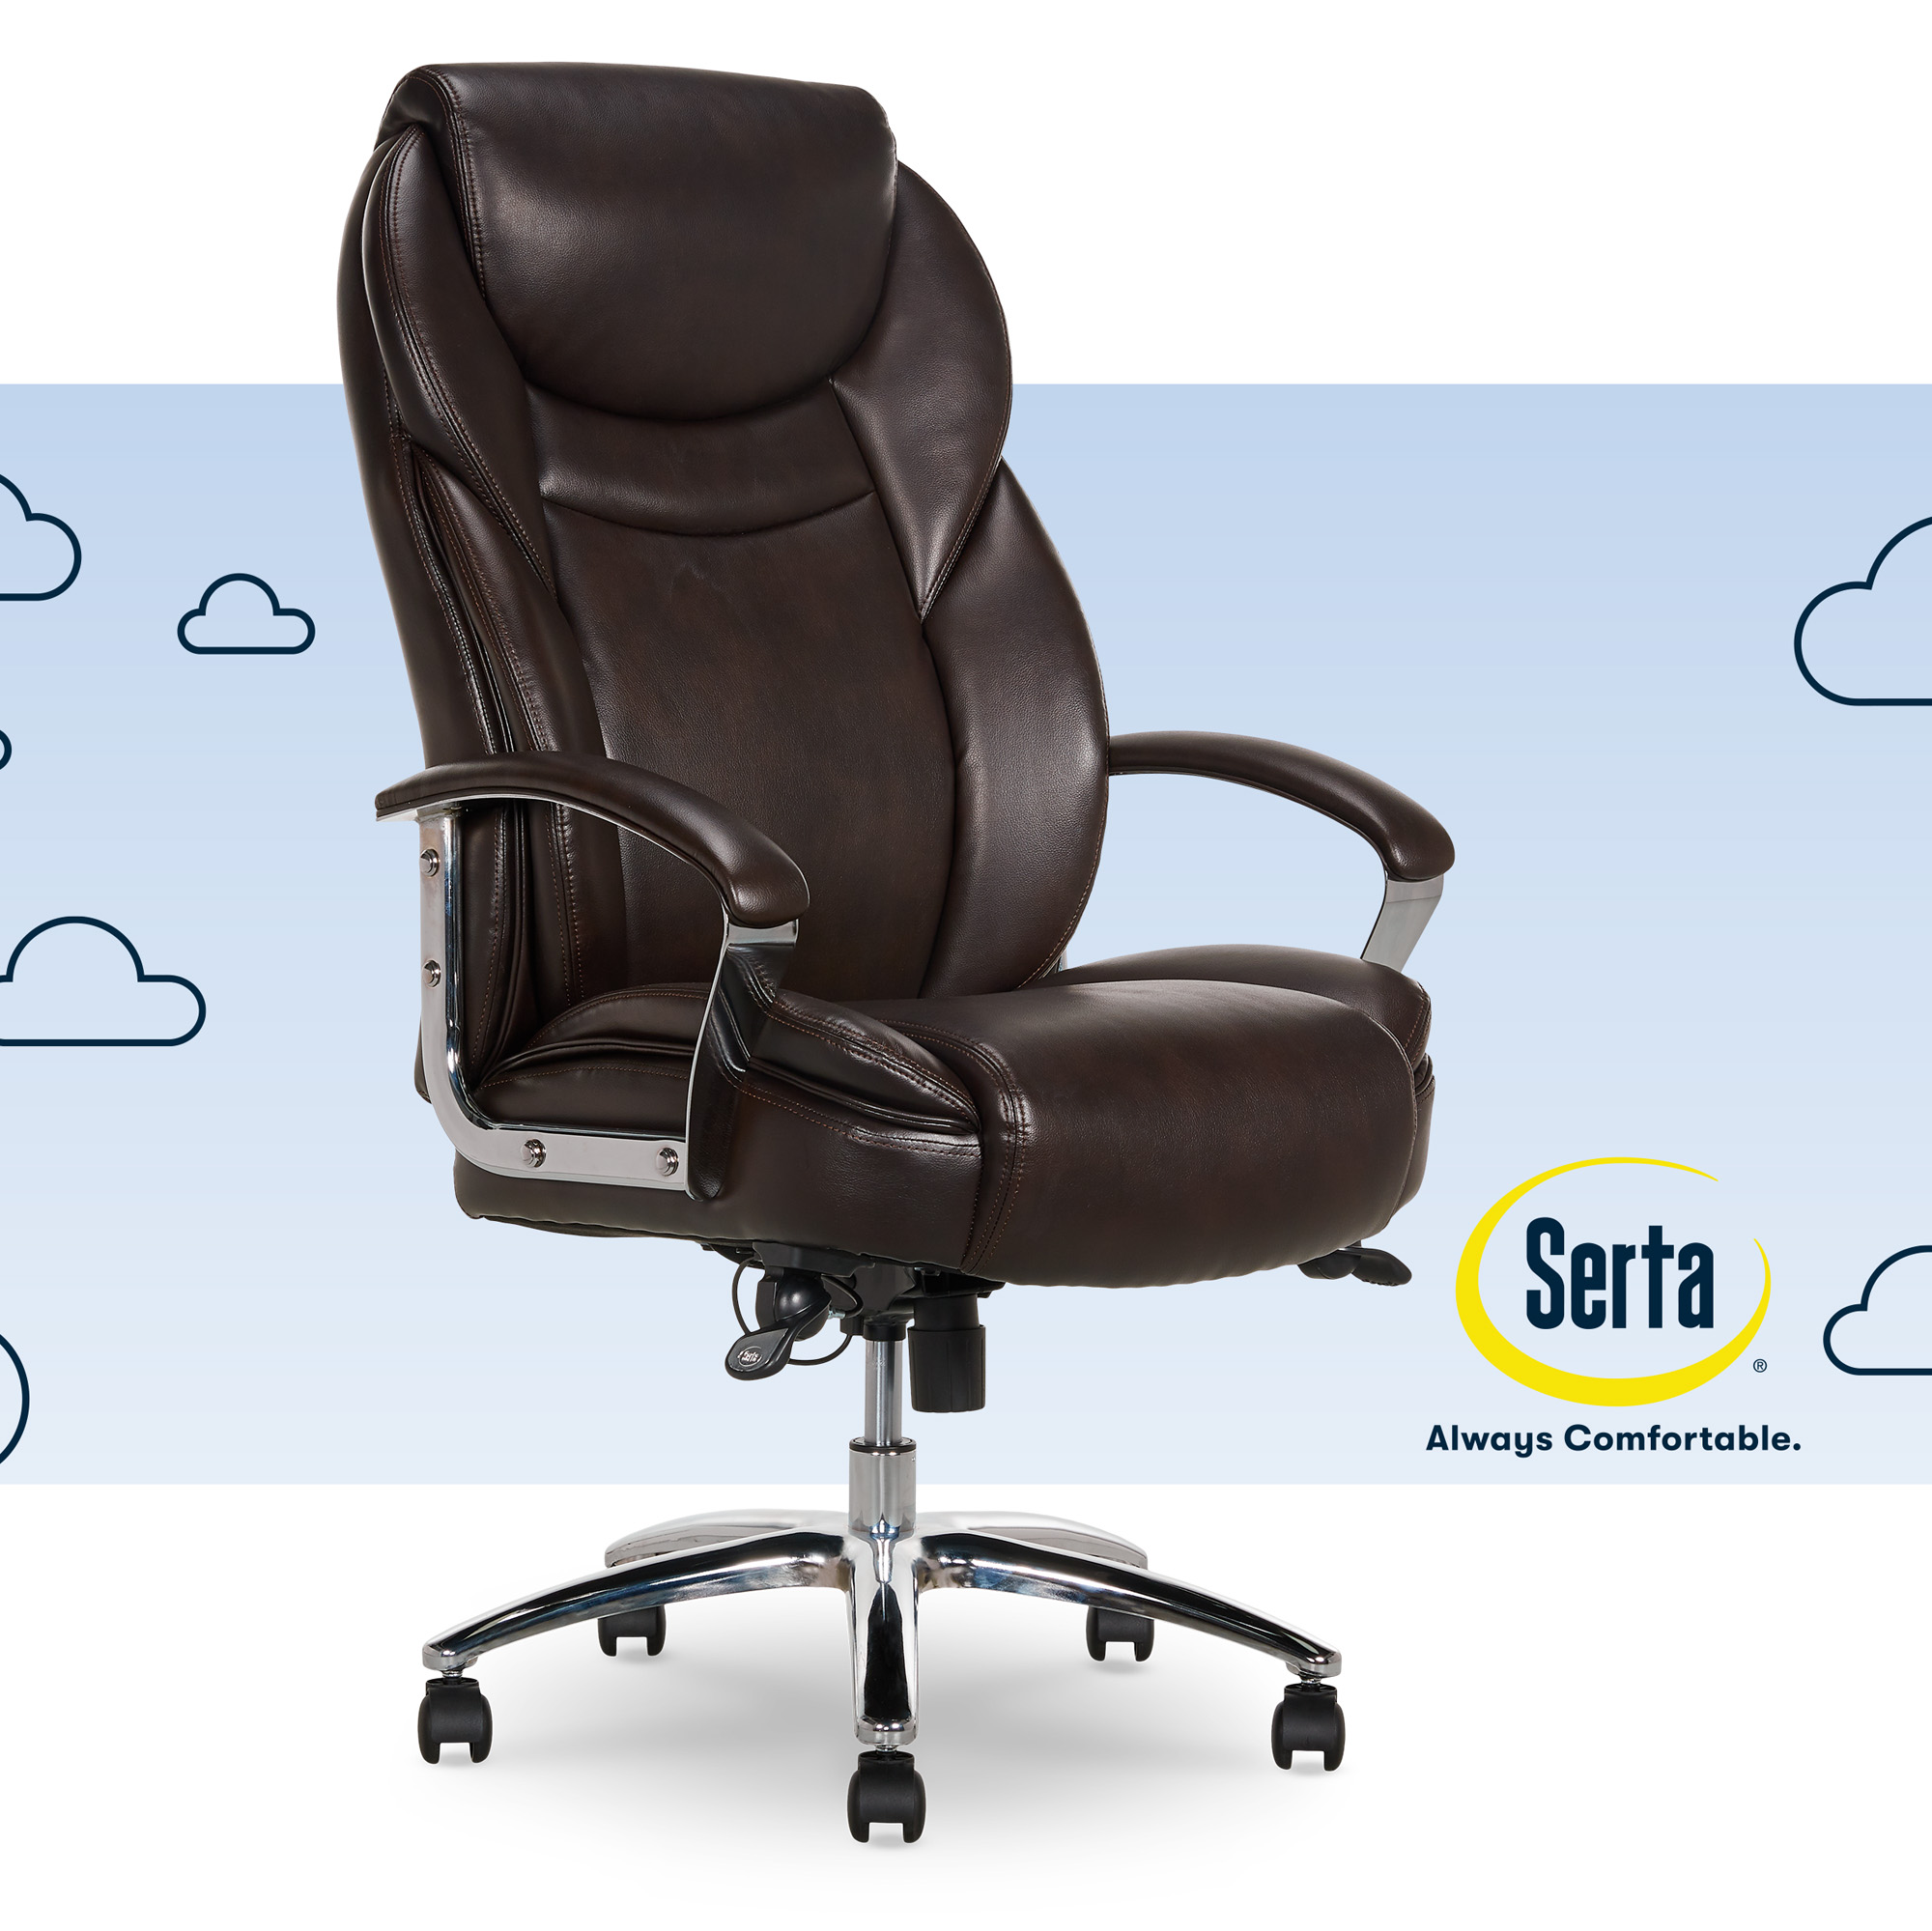 Serta Big & Tall High Back Office Chair, Heavy Duty Weight Rating, Brown Bonded Leather Upholstery - image 1 of 14